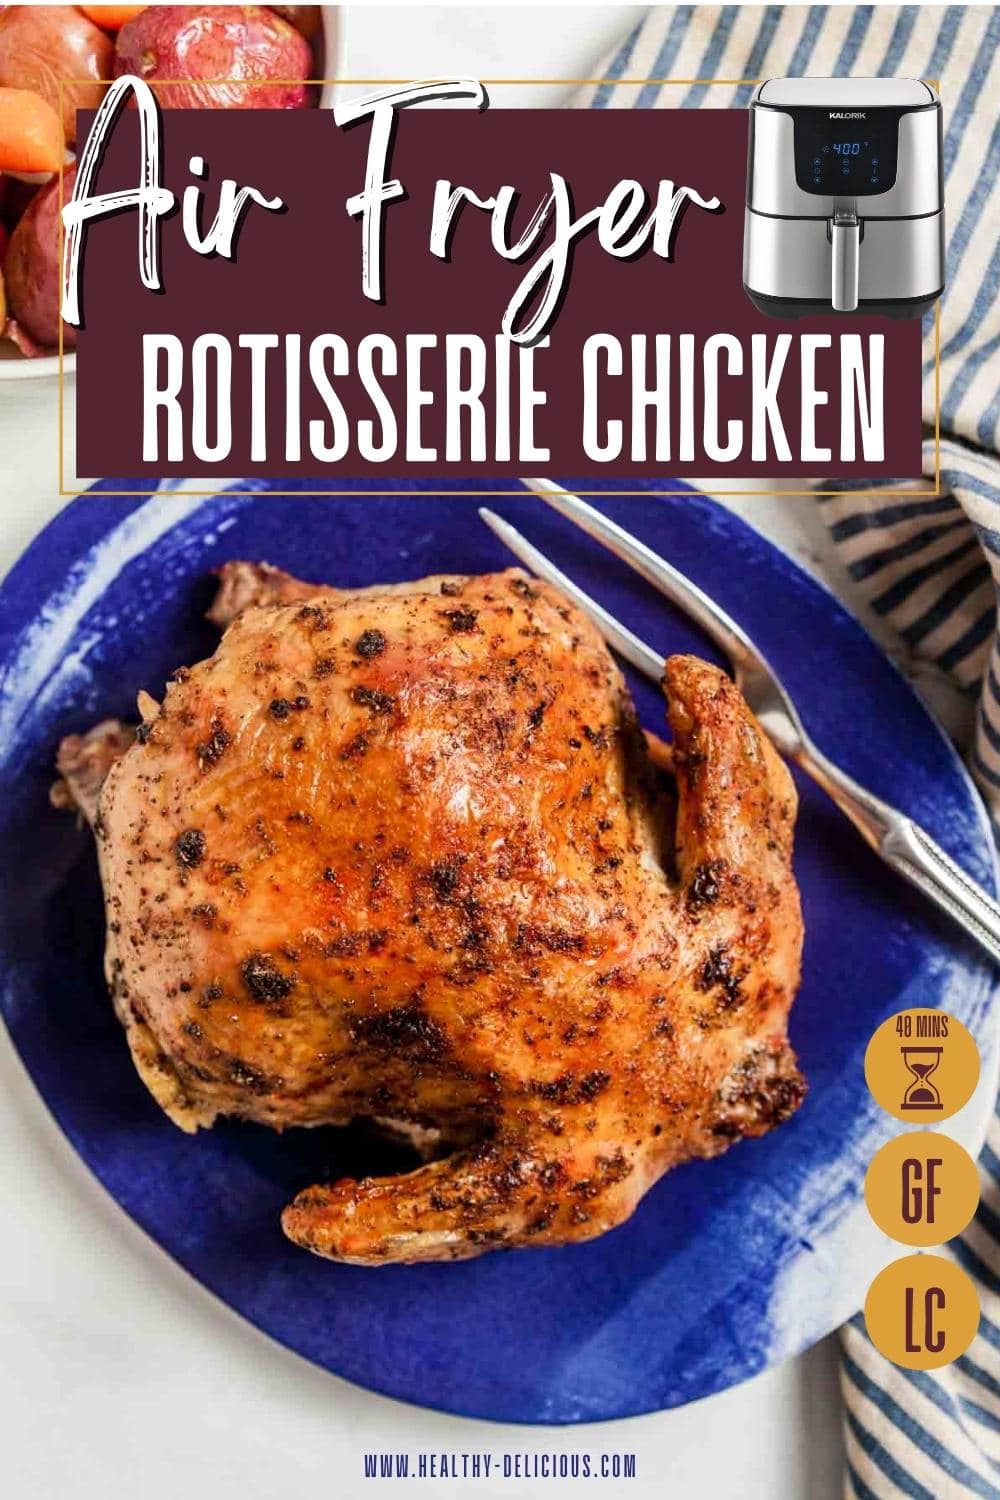 Air fryer rotisserie chicken is perfect for weeknight dinners. This recipe is so easy and quick, you can have dinner on the table with practically no effort at all. Be prepared for everyone at the table to fight over the crispy chicken skin! You can serve this roast chicken with your favorite sides, then use the leftovers to make sandwiches, salads, soup, etc. via @HealthyDelish